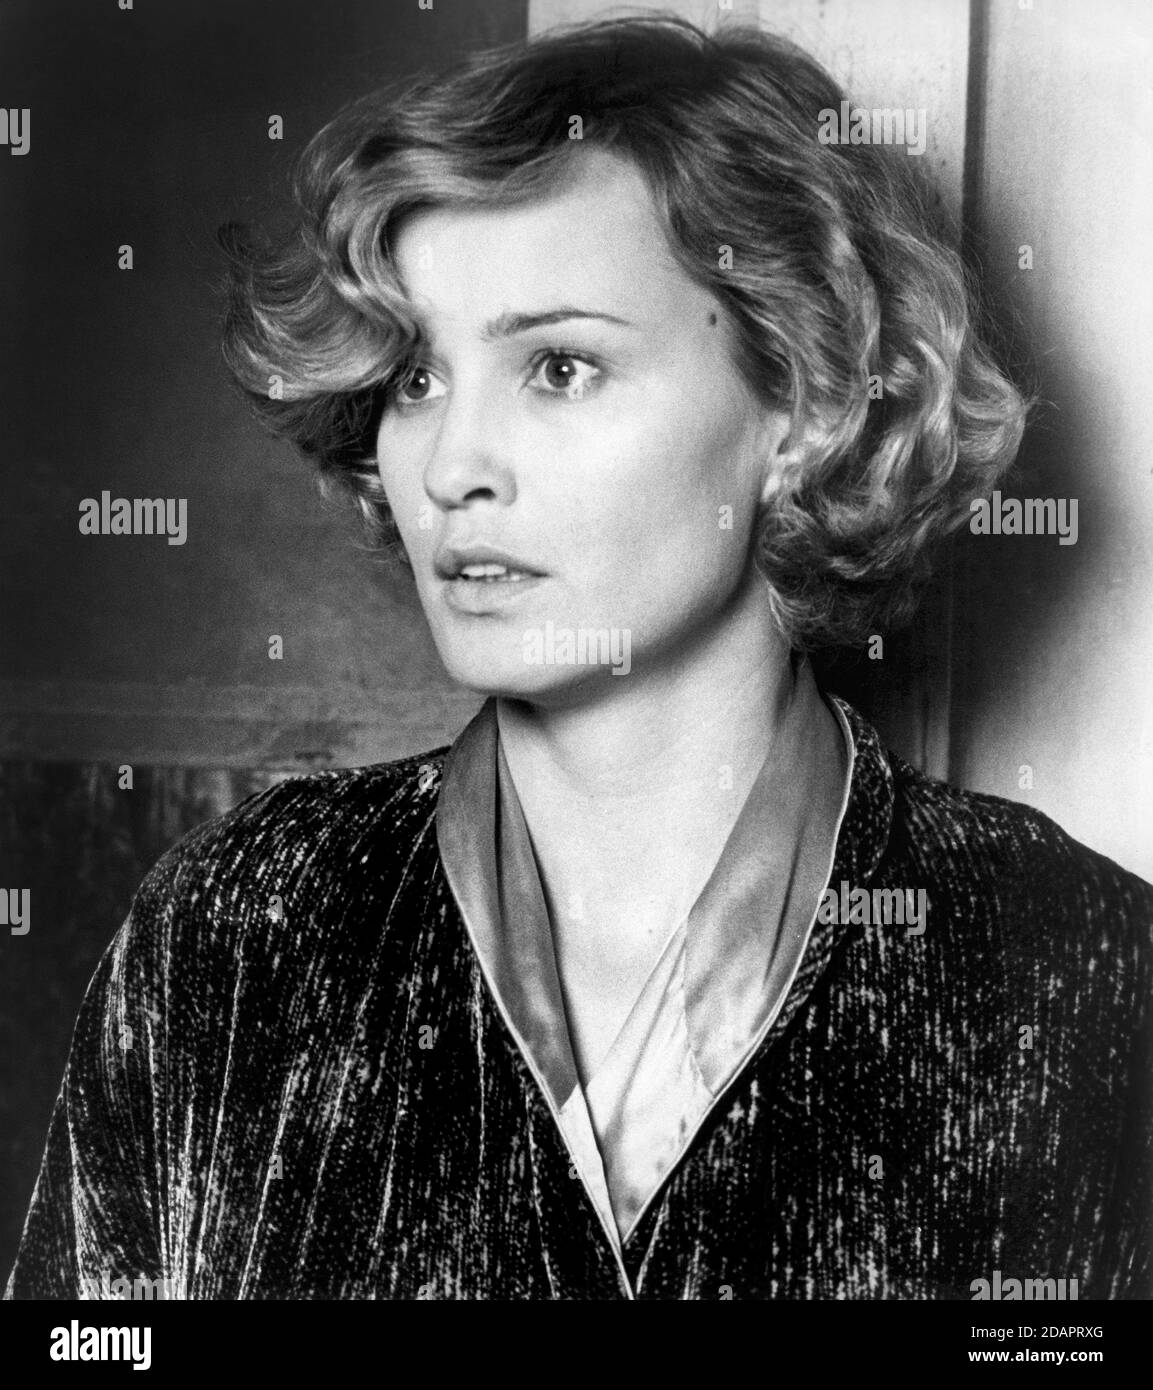 Jessica Lange, Head and Shoulders Publicity Portrait for the Film, 'The Postman Always Rings Twice', Paramount Pictures, 1981 Stock Photo